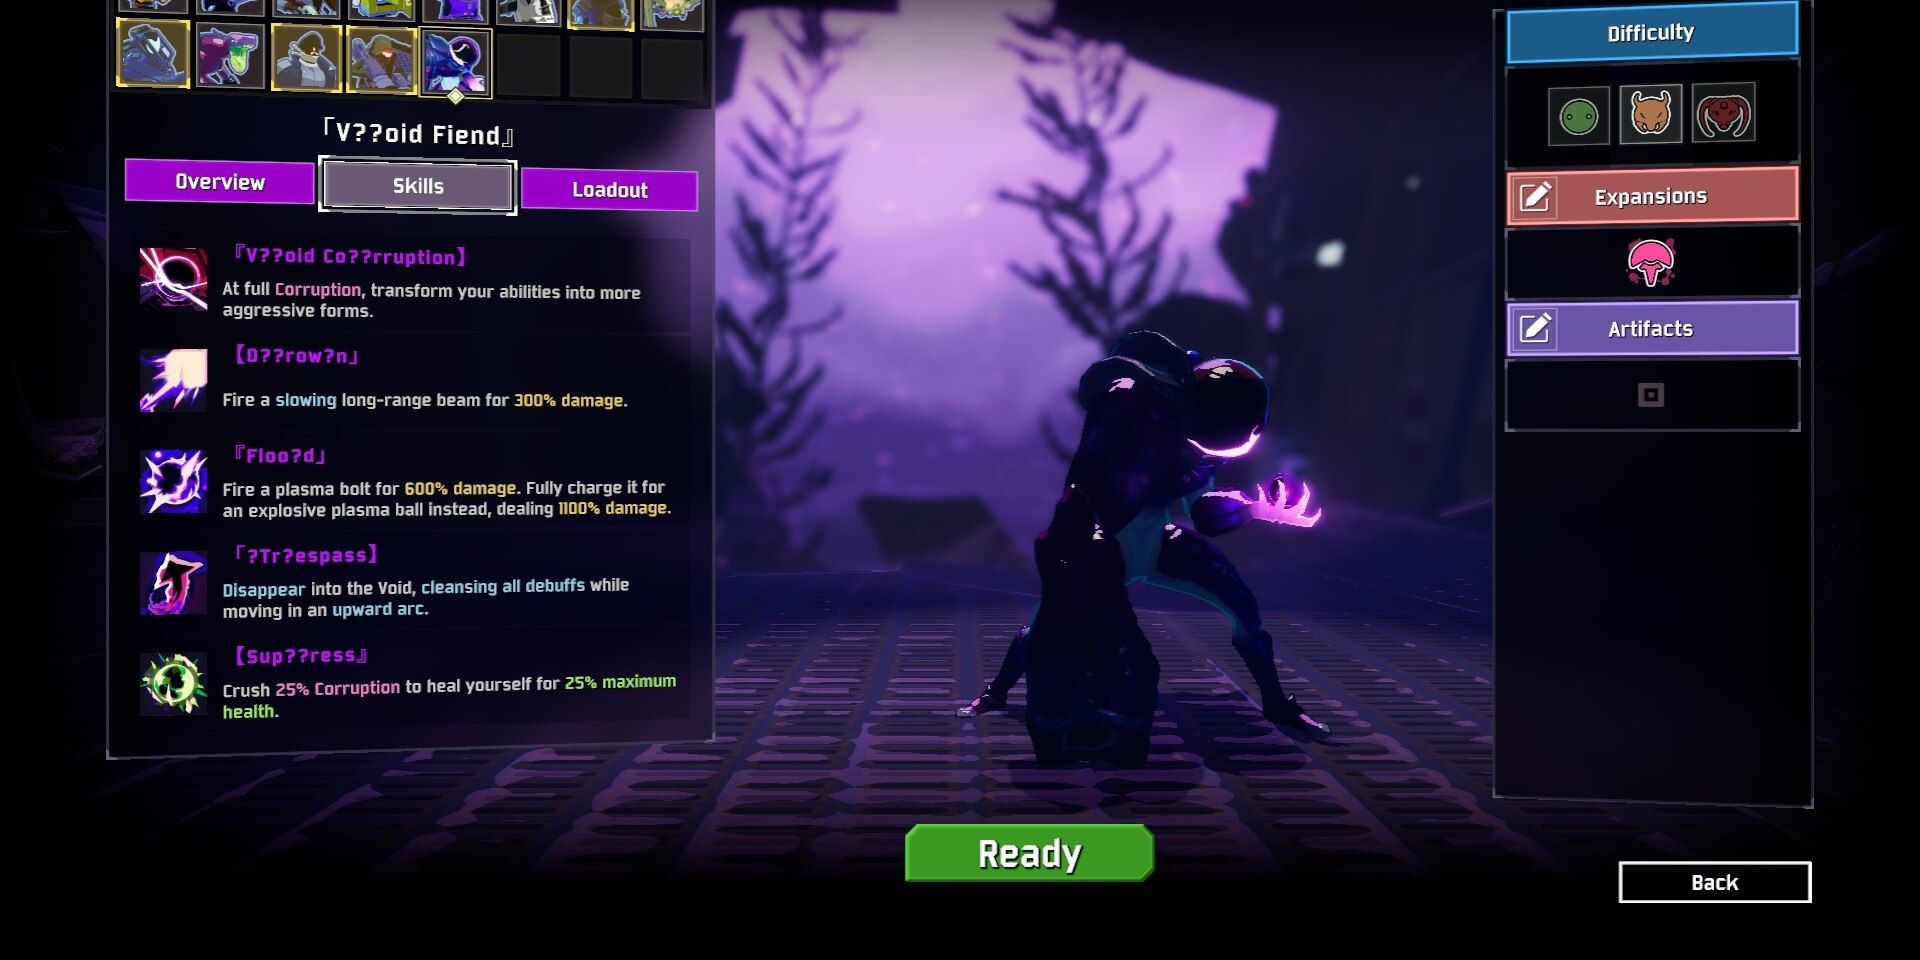 Void Fiend in the character selection screen in Risk of Rain 2